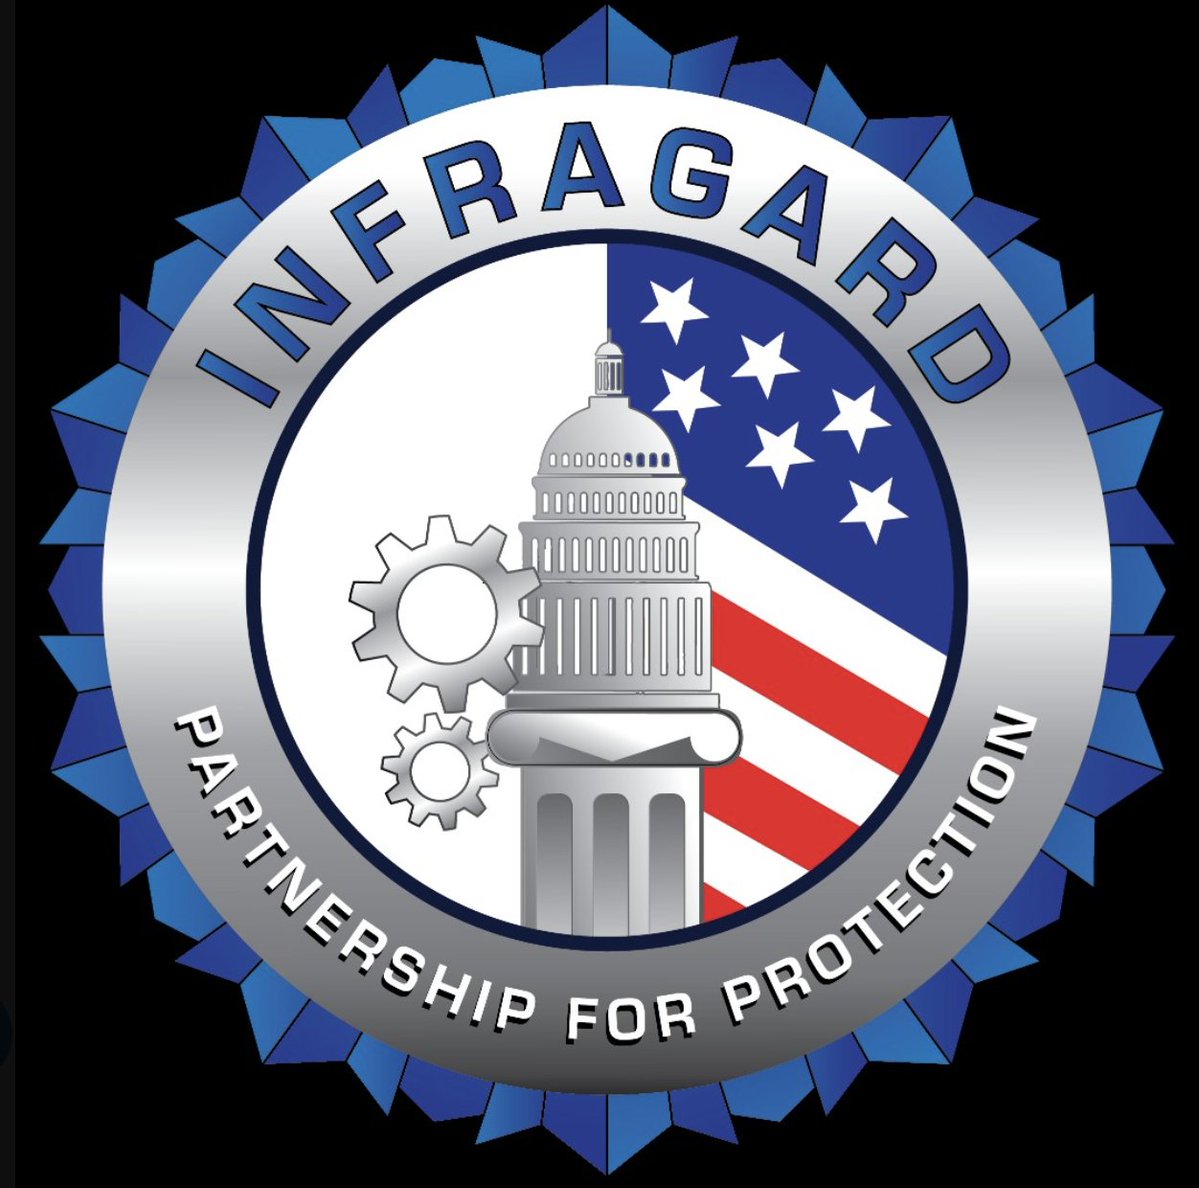 InfraGard is a partnership between the #FBI and members of the private sector that promotes mutual learning opportunities relevant to the protection of critical infrastructure. The program is currently accepting new members. Find out more here: ow.ly/N6ft50RheuW